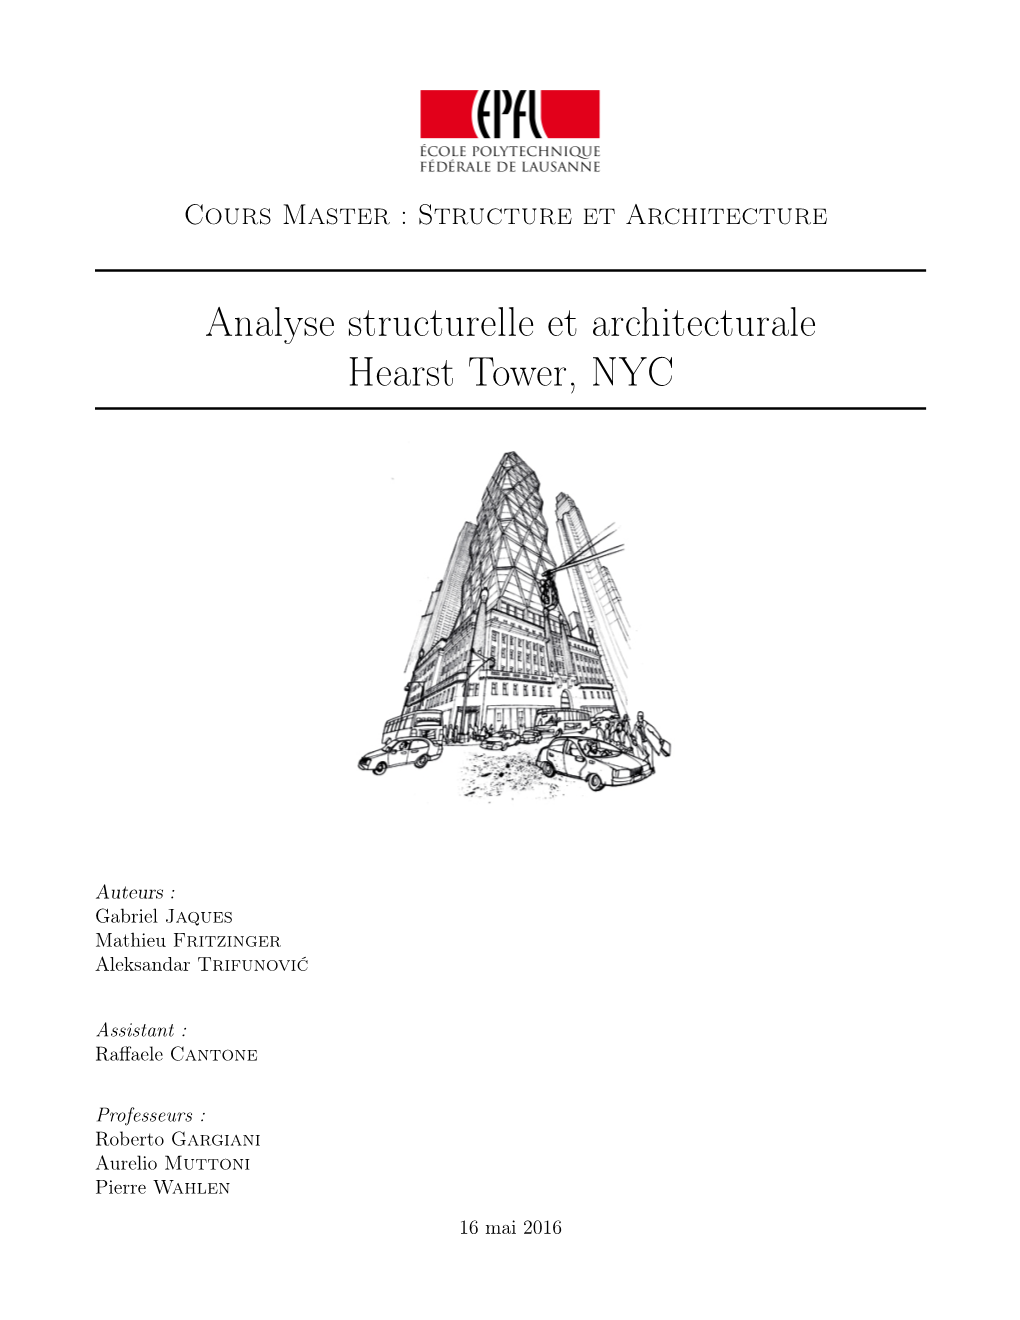 Analyse Structurelle Et Architecturale Hearst Tower, NYC